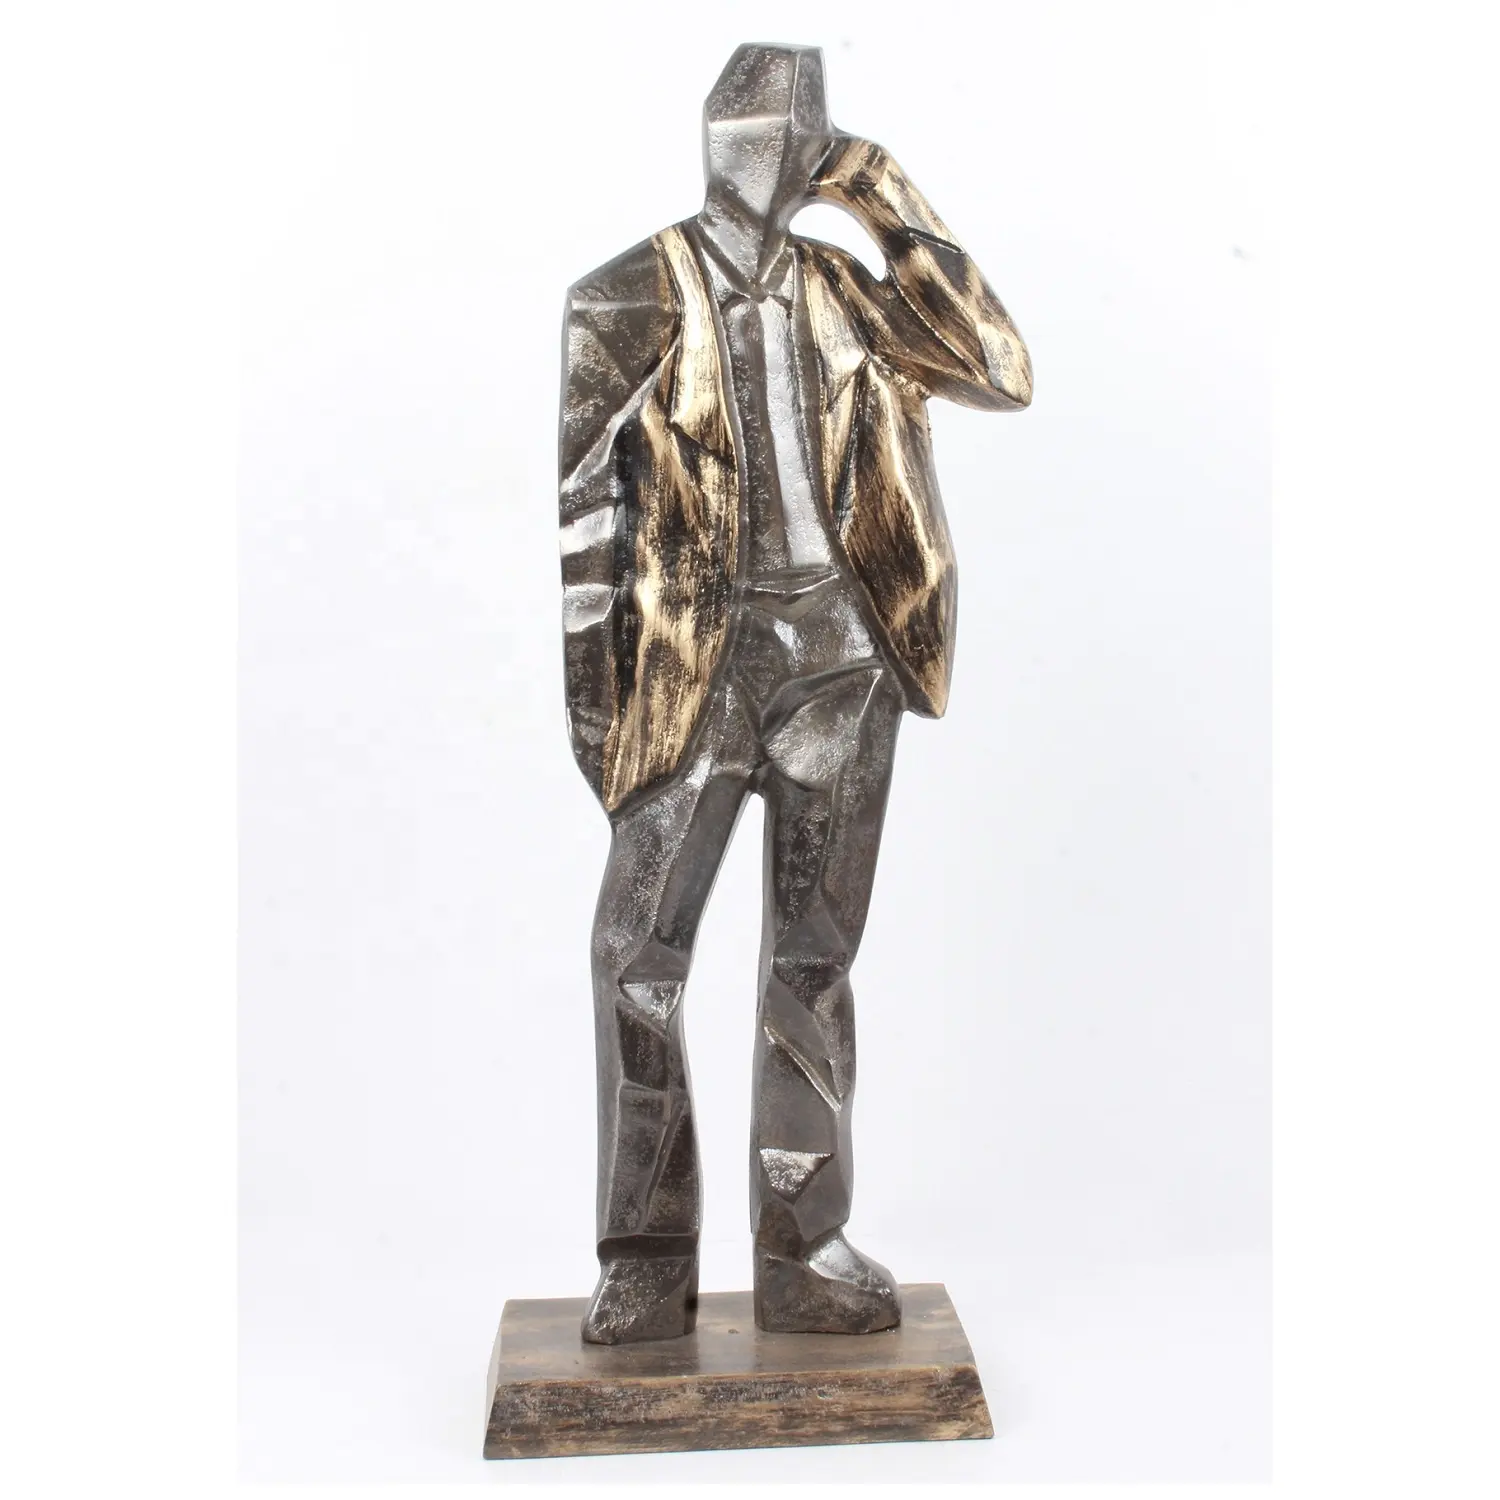 Hot Selling Cast Aluminum Man Sculpture With Brass Antique Finishing For Sale At Low Price